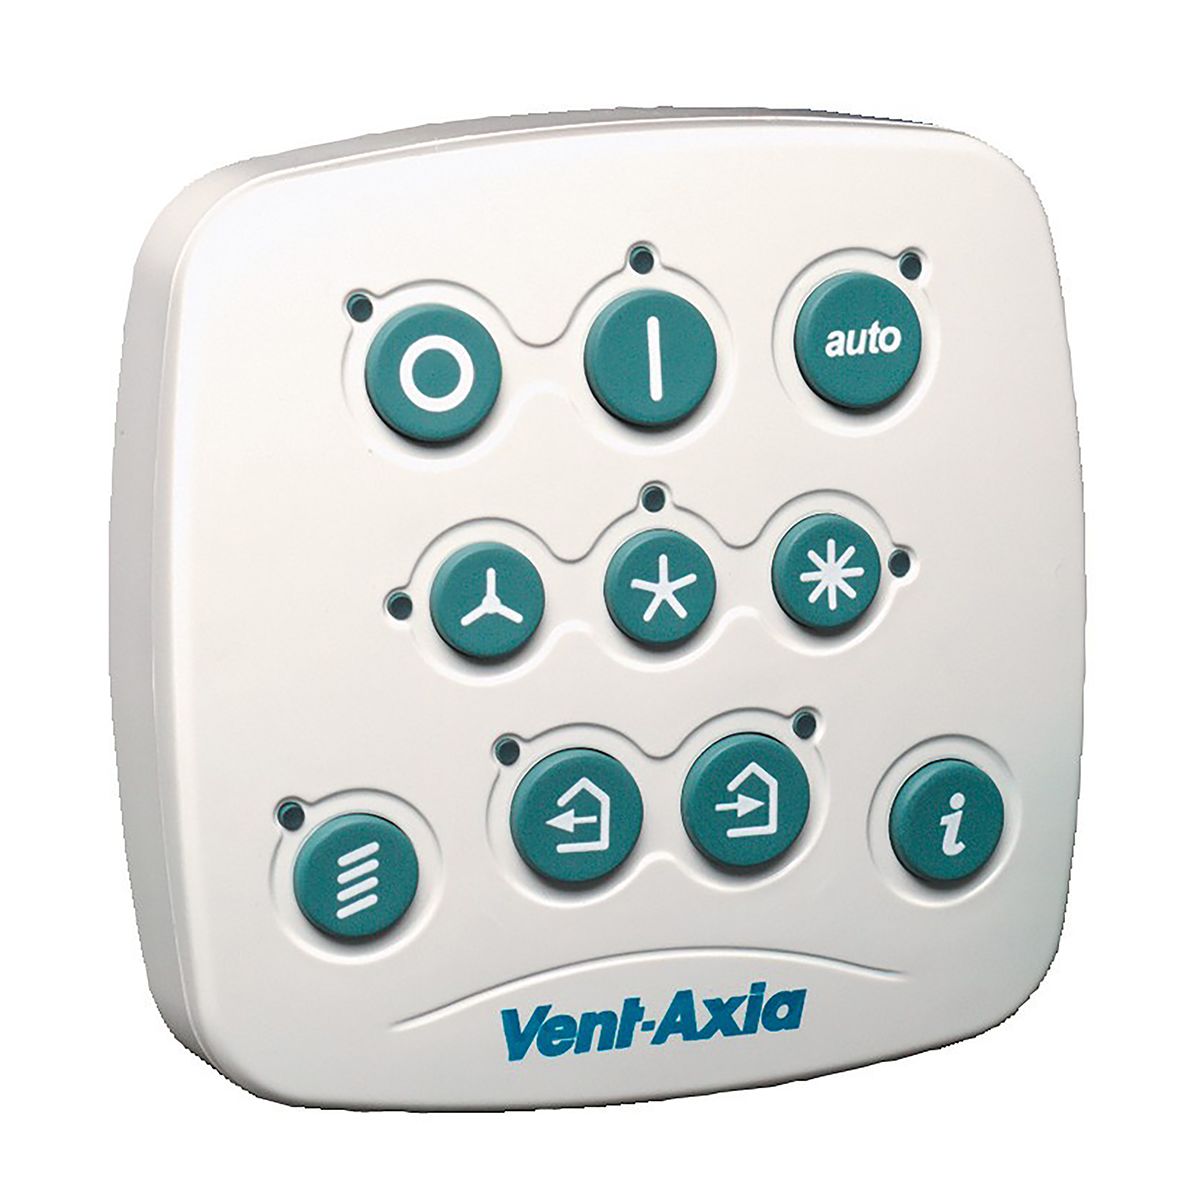 Vent-Axia T-Series Series Fan Speed Controller for Use with Lo-Carbon T-Series Wall Fan, 220 → 240 V, 3 Speeds